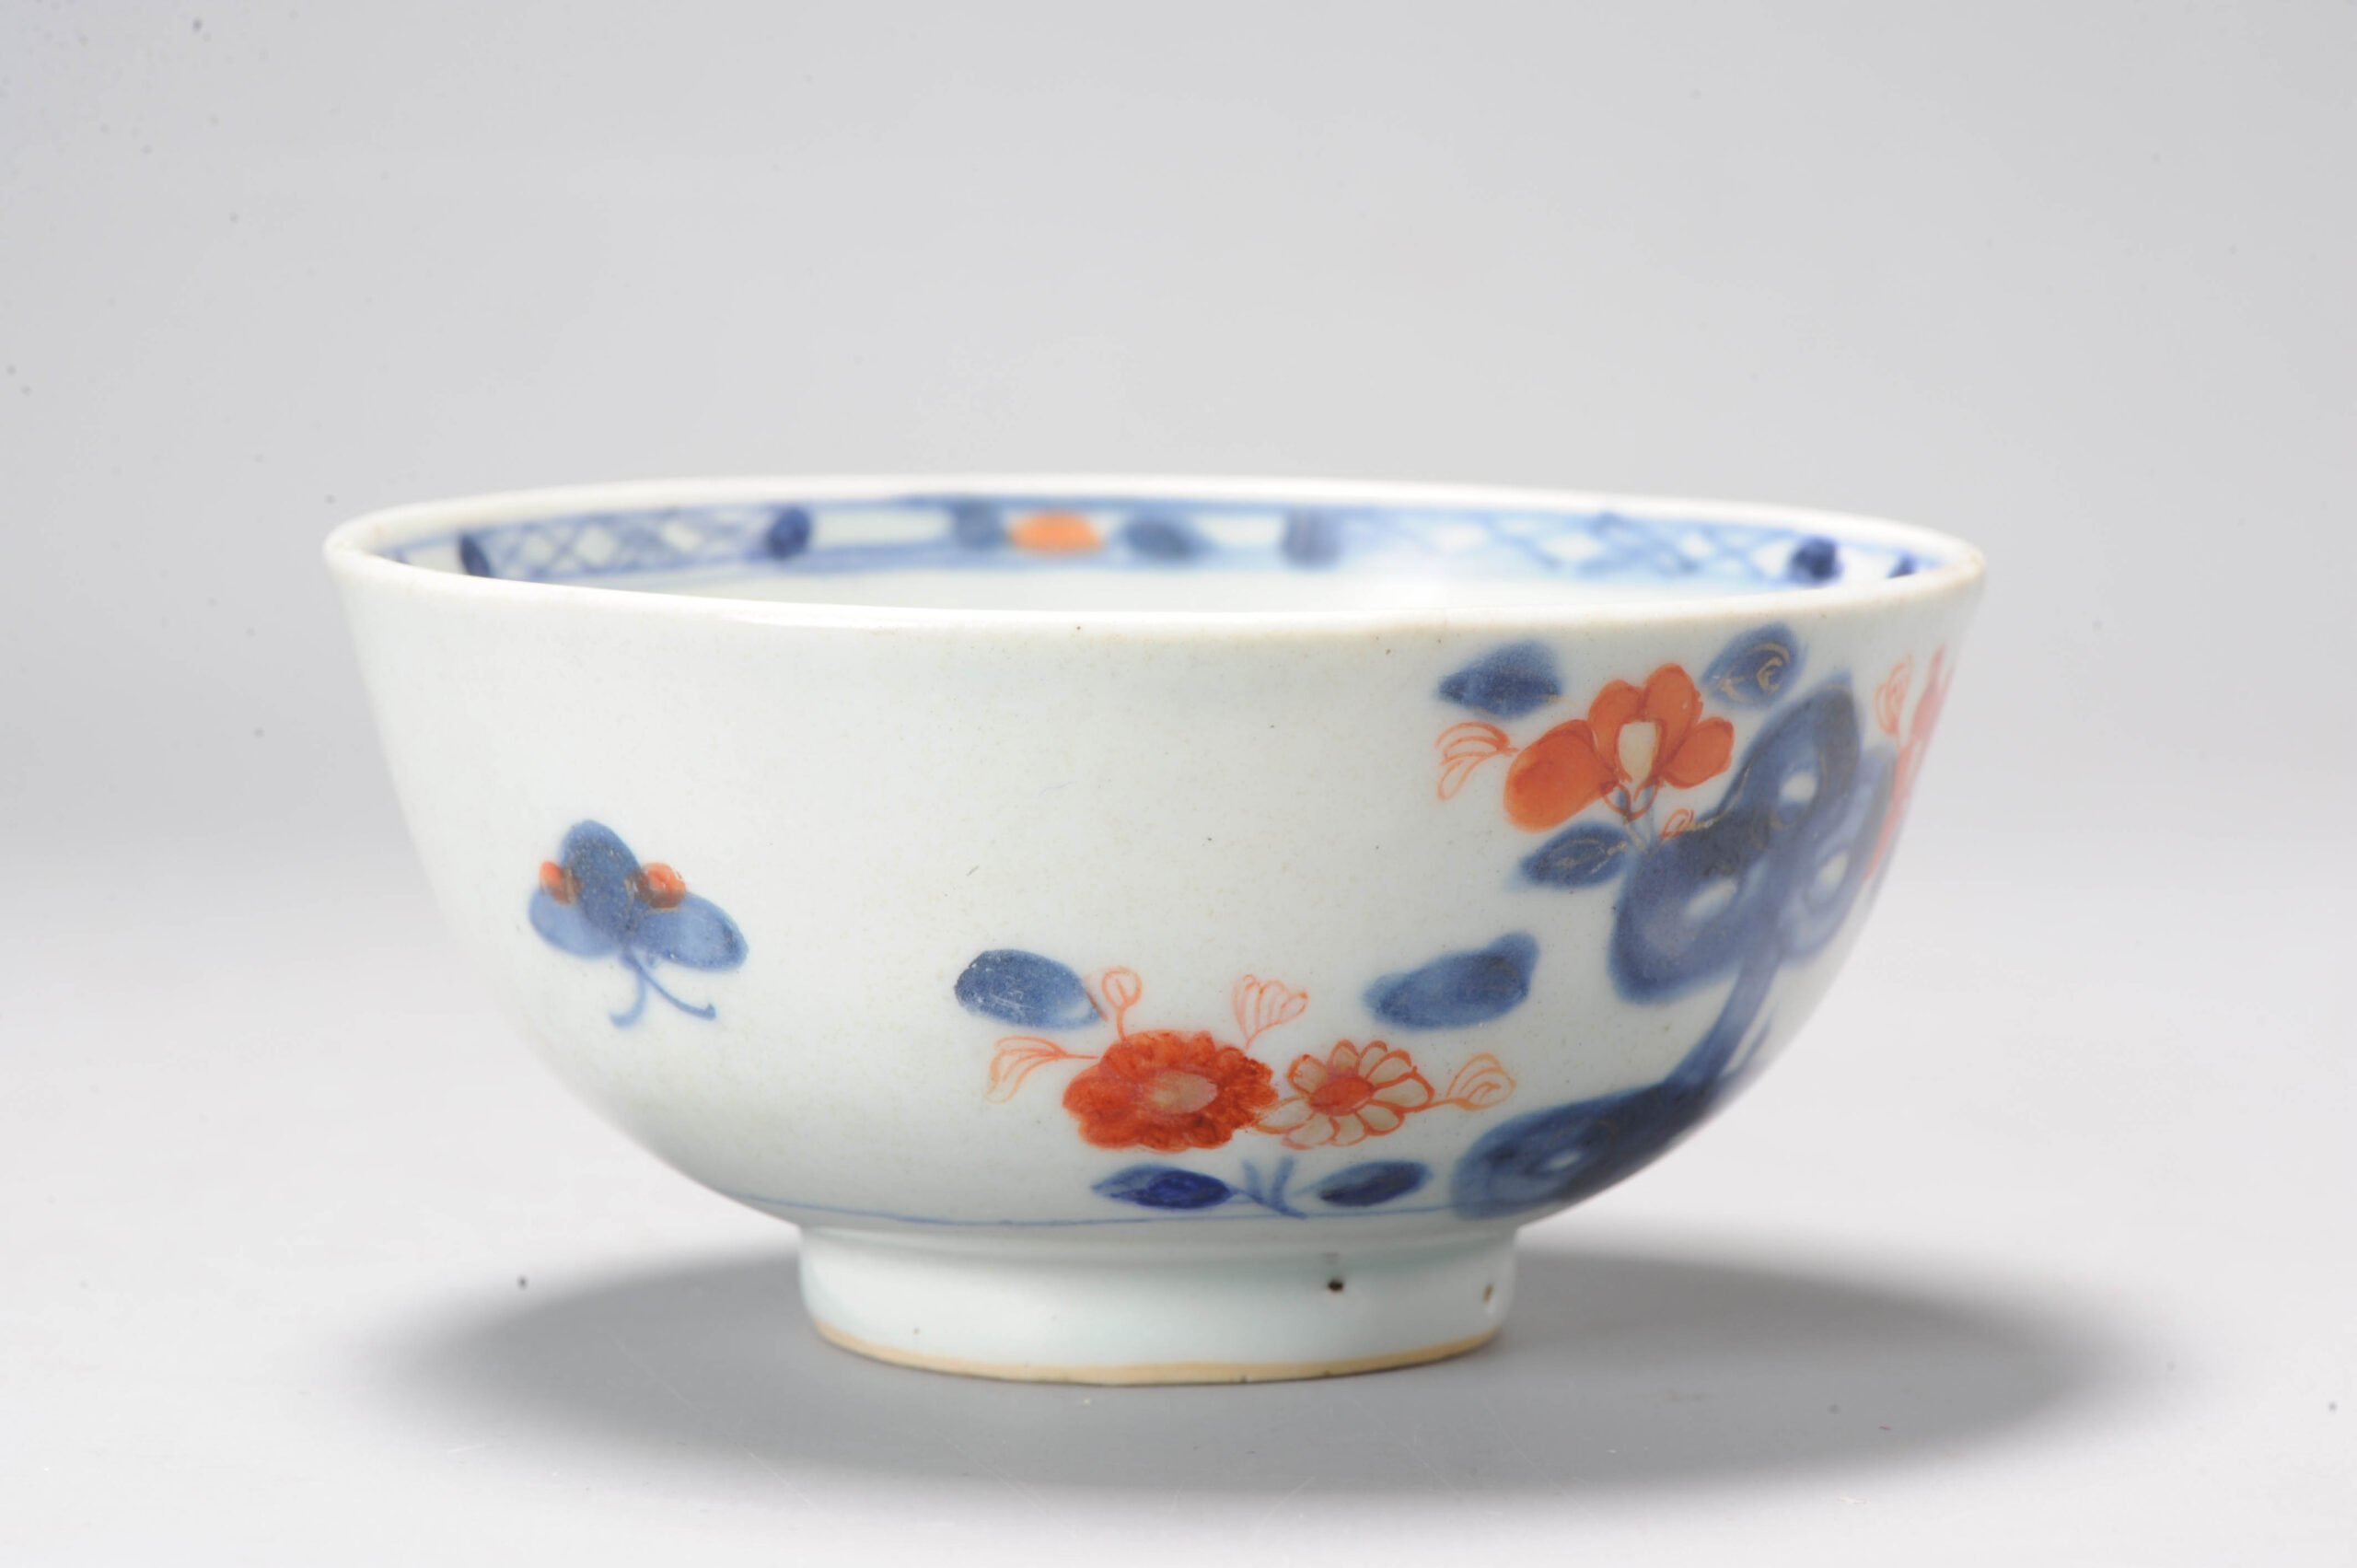 A Chinese Porcelain Imari Bowl 1720-1740 Period Floral and Butterfly